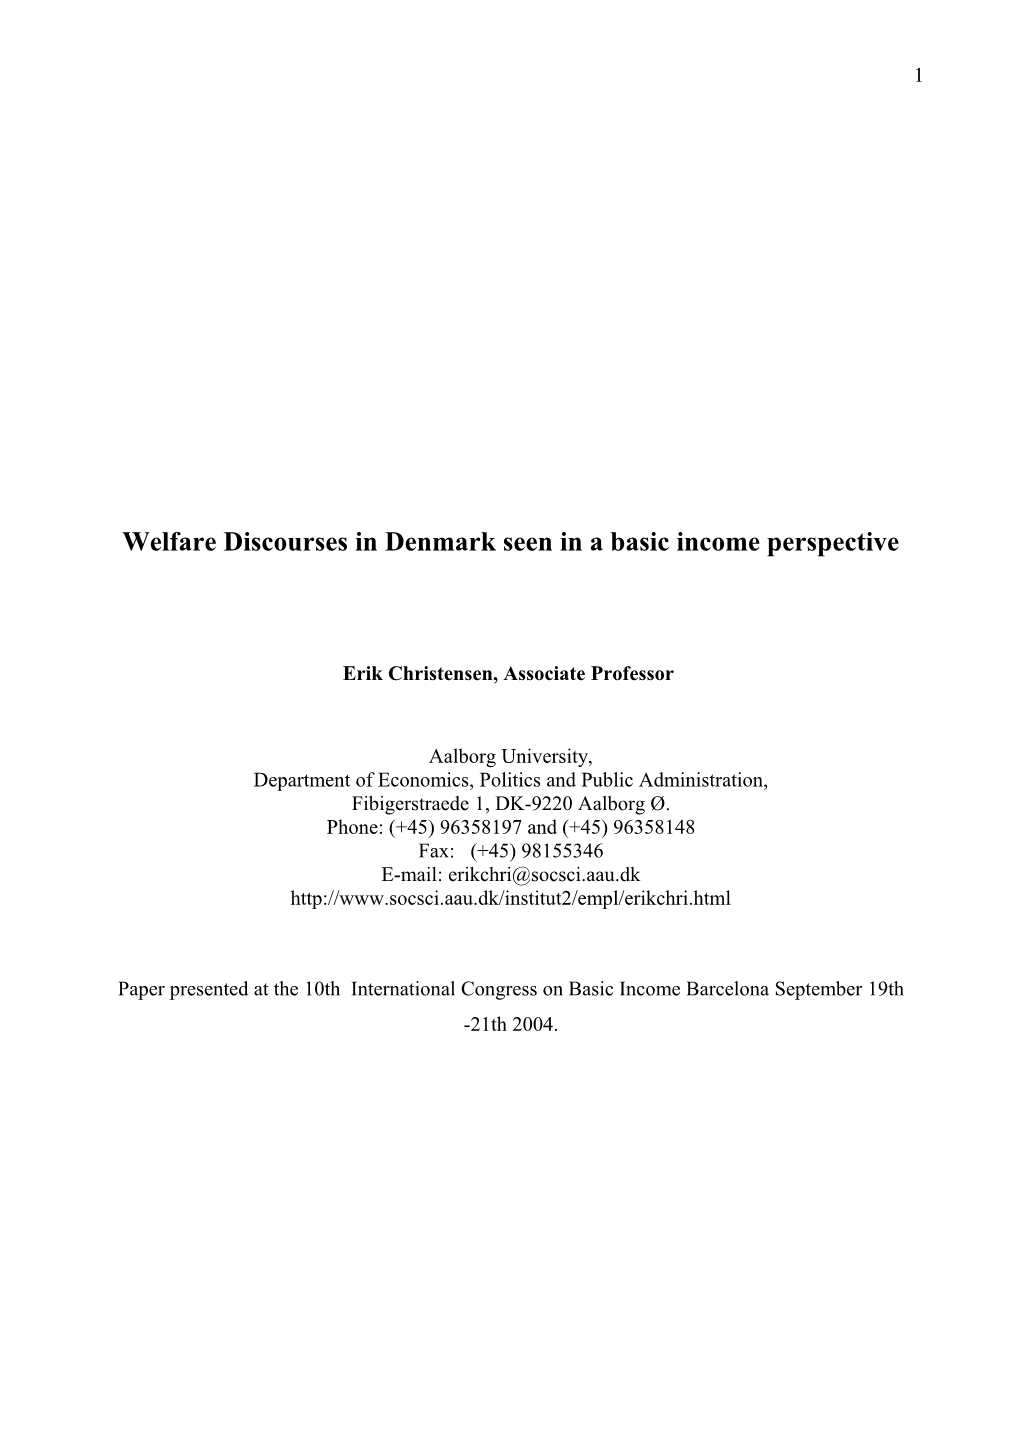 Welfare Discourses in Denmark Seen in a Basic Income Perspective